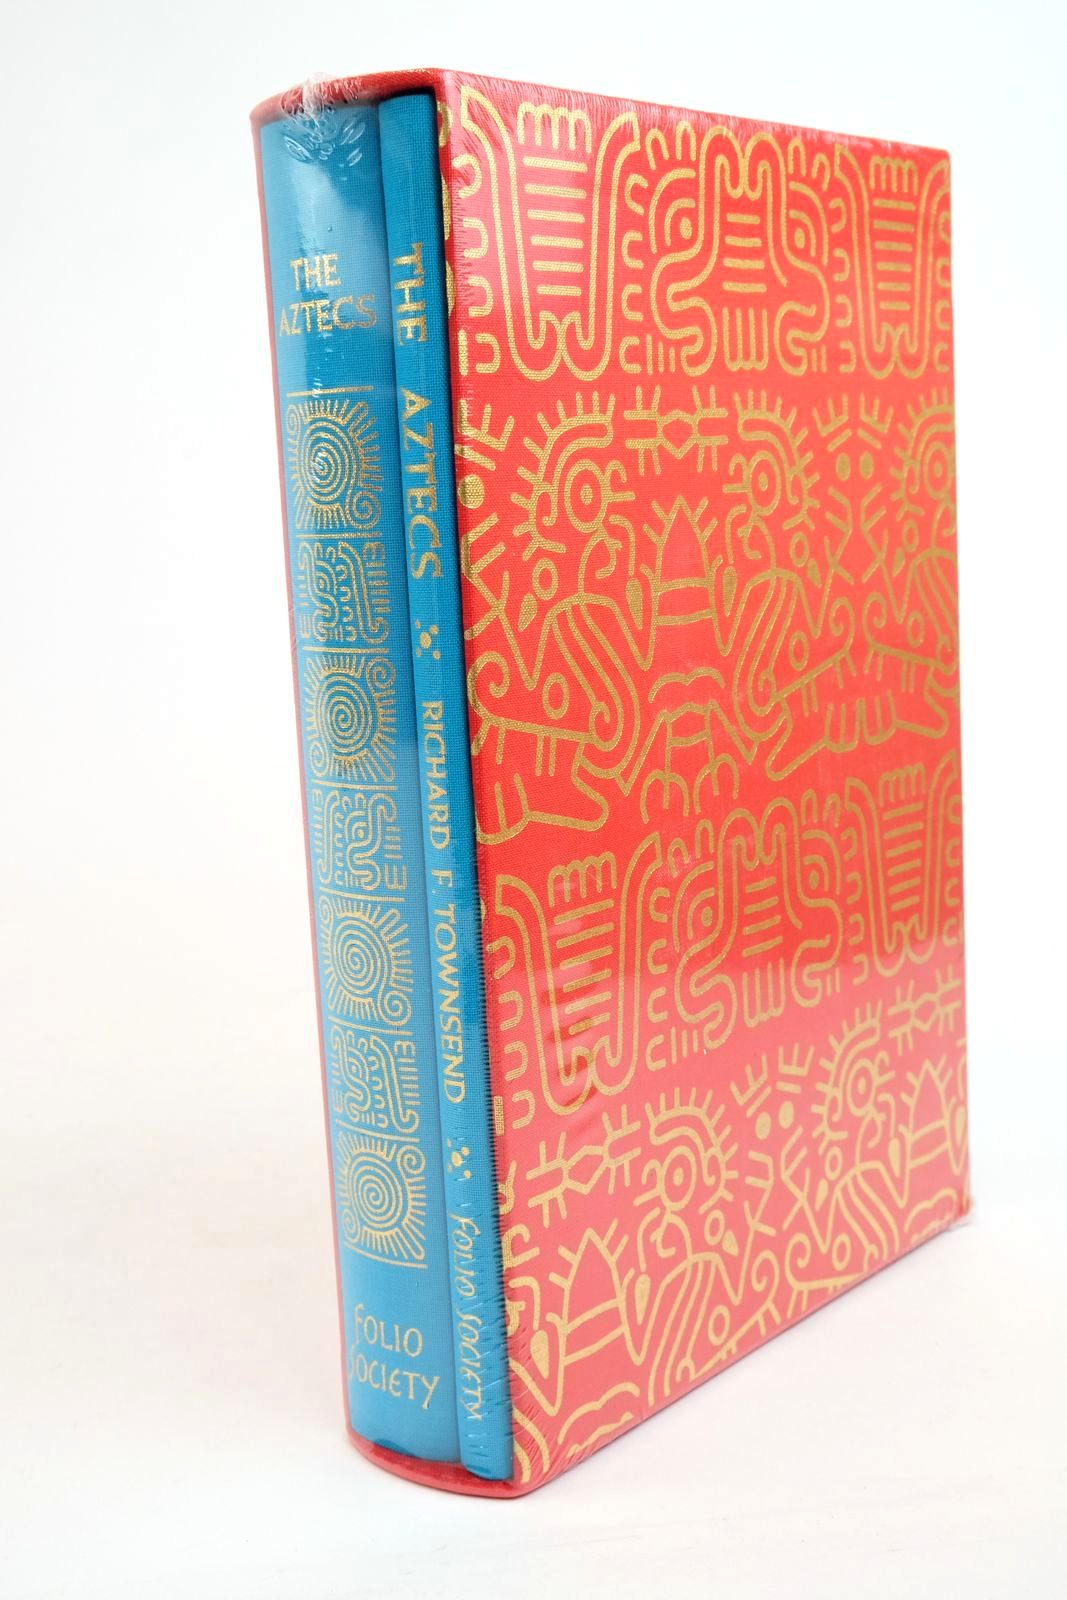 Photo of THE AZTECS (2 VOLUMES) written by Townsend, Richard F. published by Folio Society (STOCK CODE: 1322273)  for sale by Stella & Rose's Books